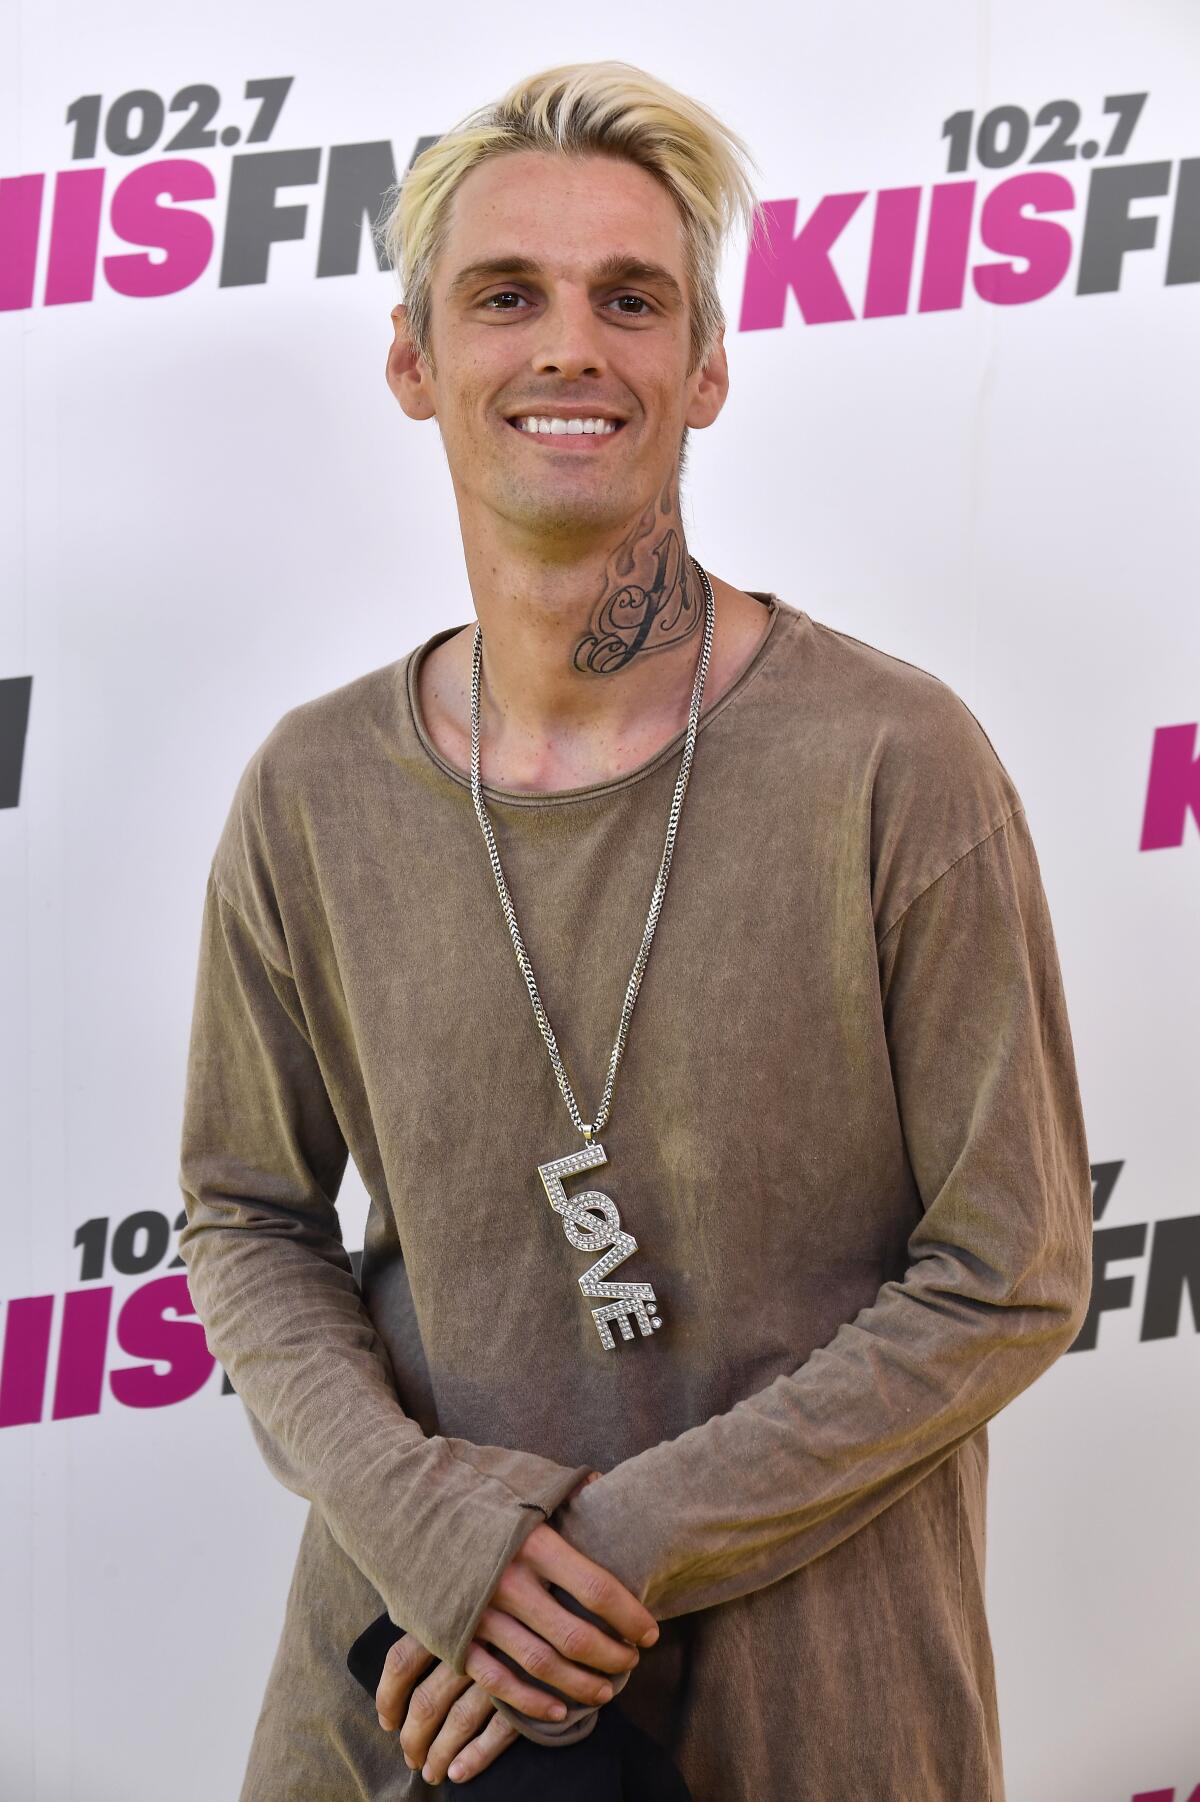 Aaron Carter let loose on Twitter after his brother said he's seeking a restraining order against him.